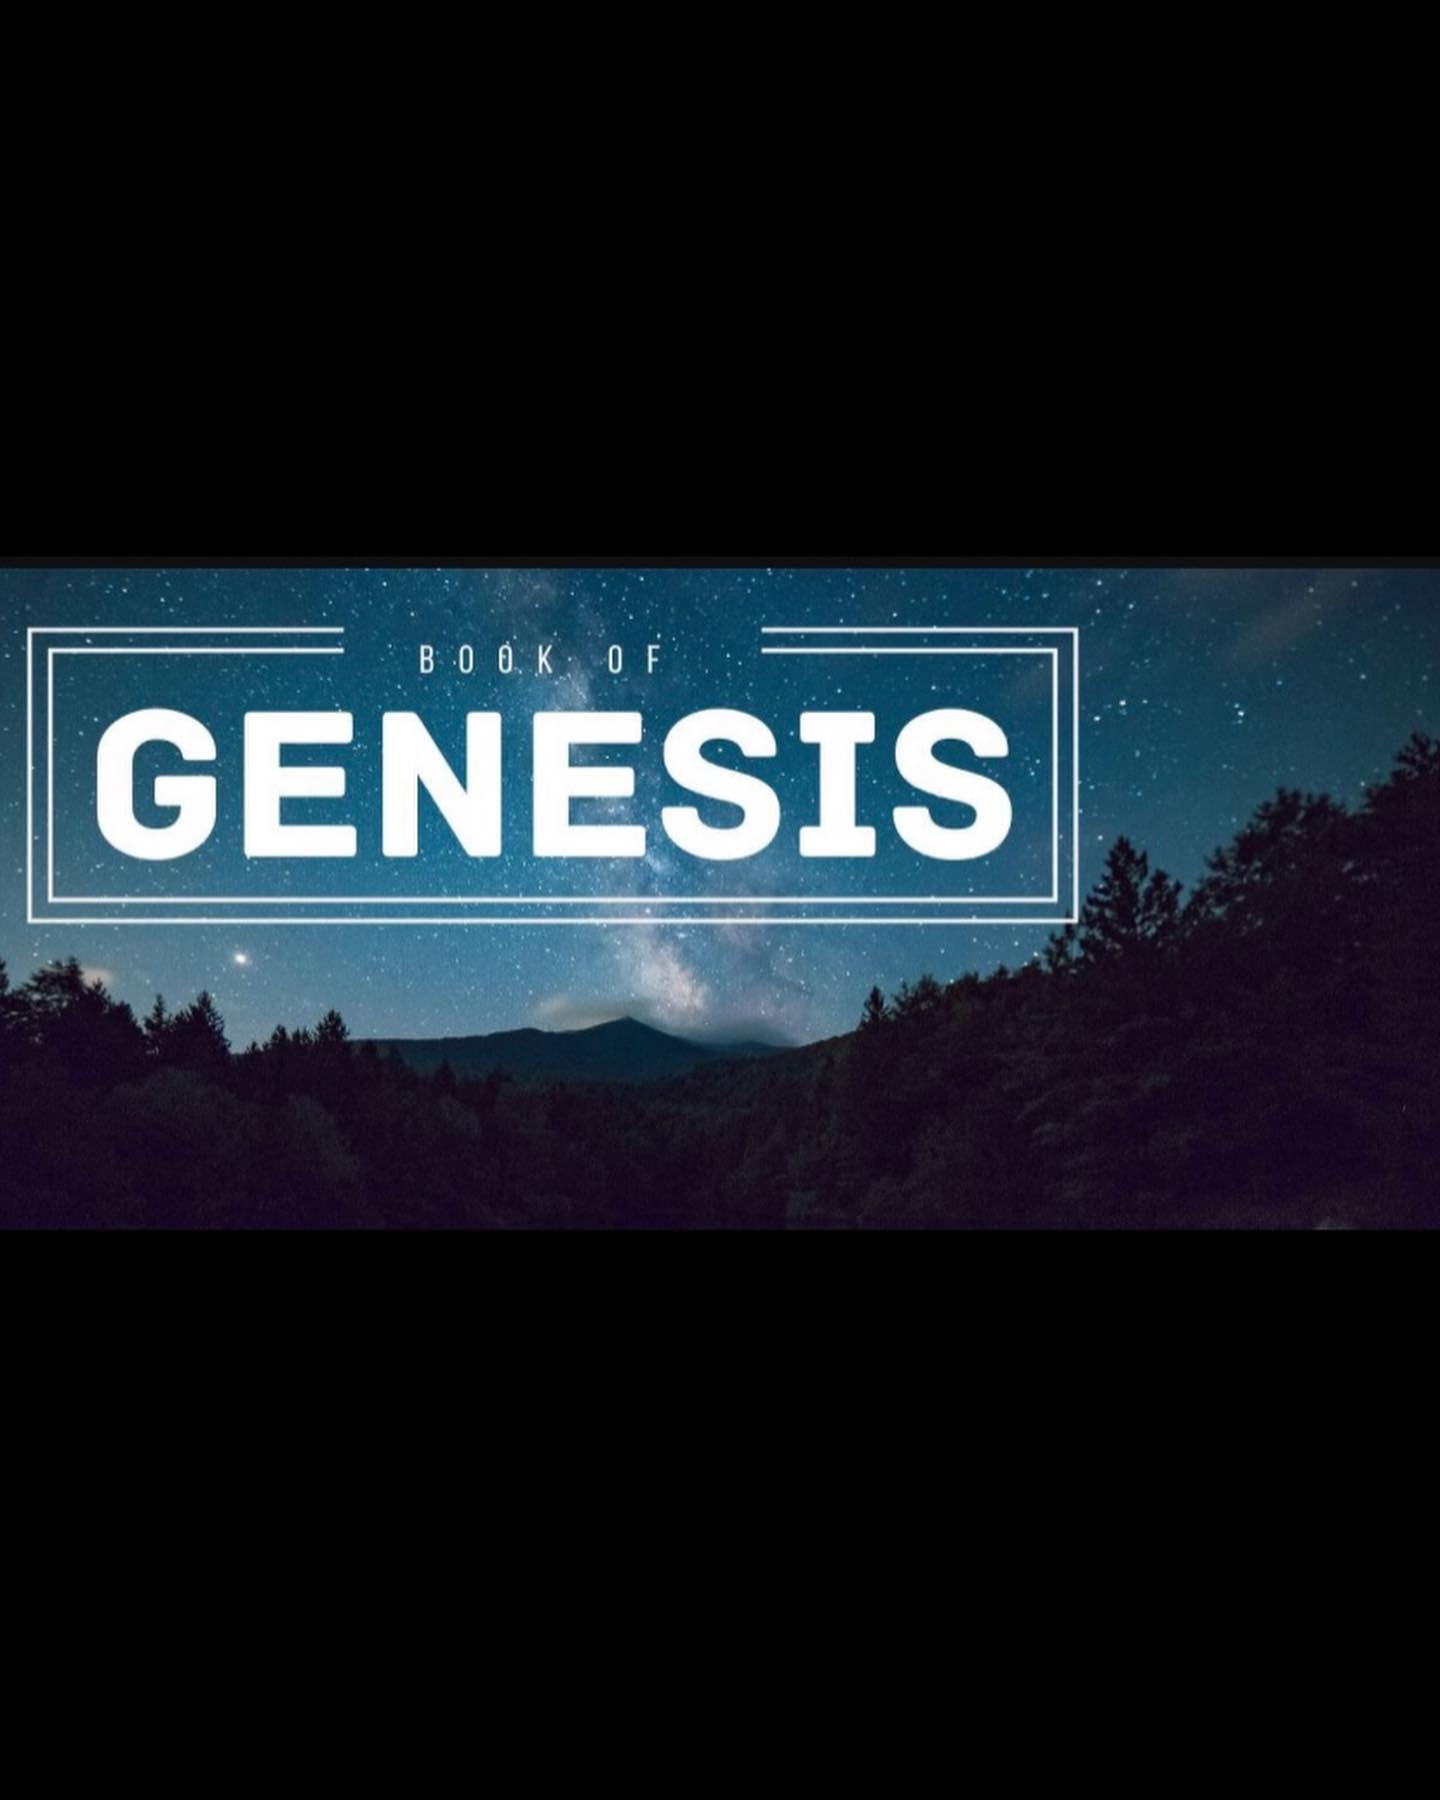 The book of Genesis is foundational- for everything! Your worldview is shaped on your belief of the historical events recorded in Genesis. The book contains the famous accounts of creation, the fall of man, the flood, the Tower of Babel, the Messianic lineage, of Adam and Eve, Cain and Abel, the patriarchs Abraham Isaac and Jacob, and the victorious life story of Joseph which parallels our Messiah, Jesus Christ. The Lord allowed us to take our time all through 2023 to dig into the book of Genesis as a church family. What a beautiful and revealing journey it’s been! We are changed, for sure.Join us Sunday 10AM @fallbrookvineyardchurch as we recap Genesis. Steph will take us from creation to Babel, Dave will recount the patriarchs, and Katy will explain the similarities of Joseph and Jesus Christ. Don’t miss Sunday! Bring your friends, your bibles and your chairs 🧡Also- @thevineyard1924 Christmas trees are here 🌲🌲🌲 and they are beautiful! Pizza and fellowship after church! God is so good! #bookofgenesis#creation#fallofman#theflood#towerofbabel#thepatriarchs#joseph#jesus#thewaythetruththelife#thebible#hymns#prayer #lifeabundant#community #support #love#familyofgod #outdoorchurch #organicchurch #outlawchurch #dogfriendlychurch#fallbrookvineyardchurch#thevineyard1924